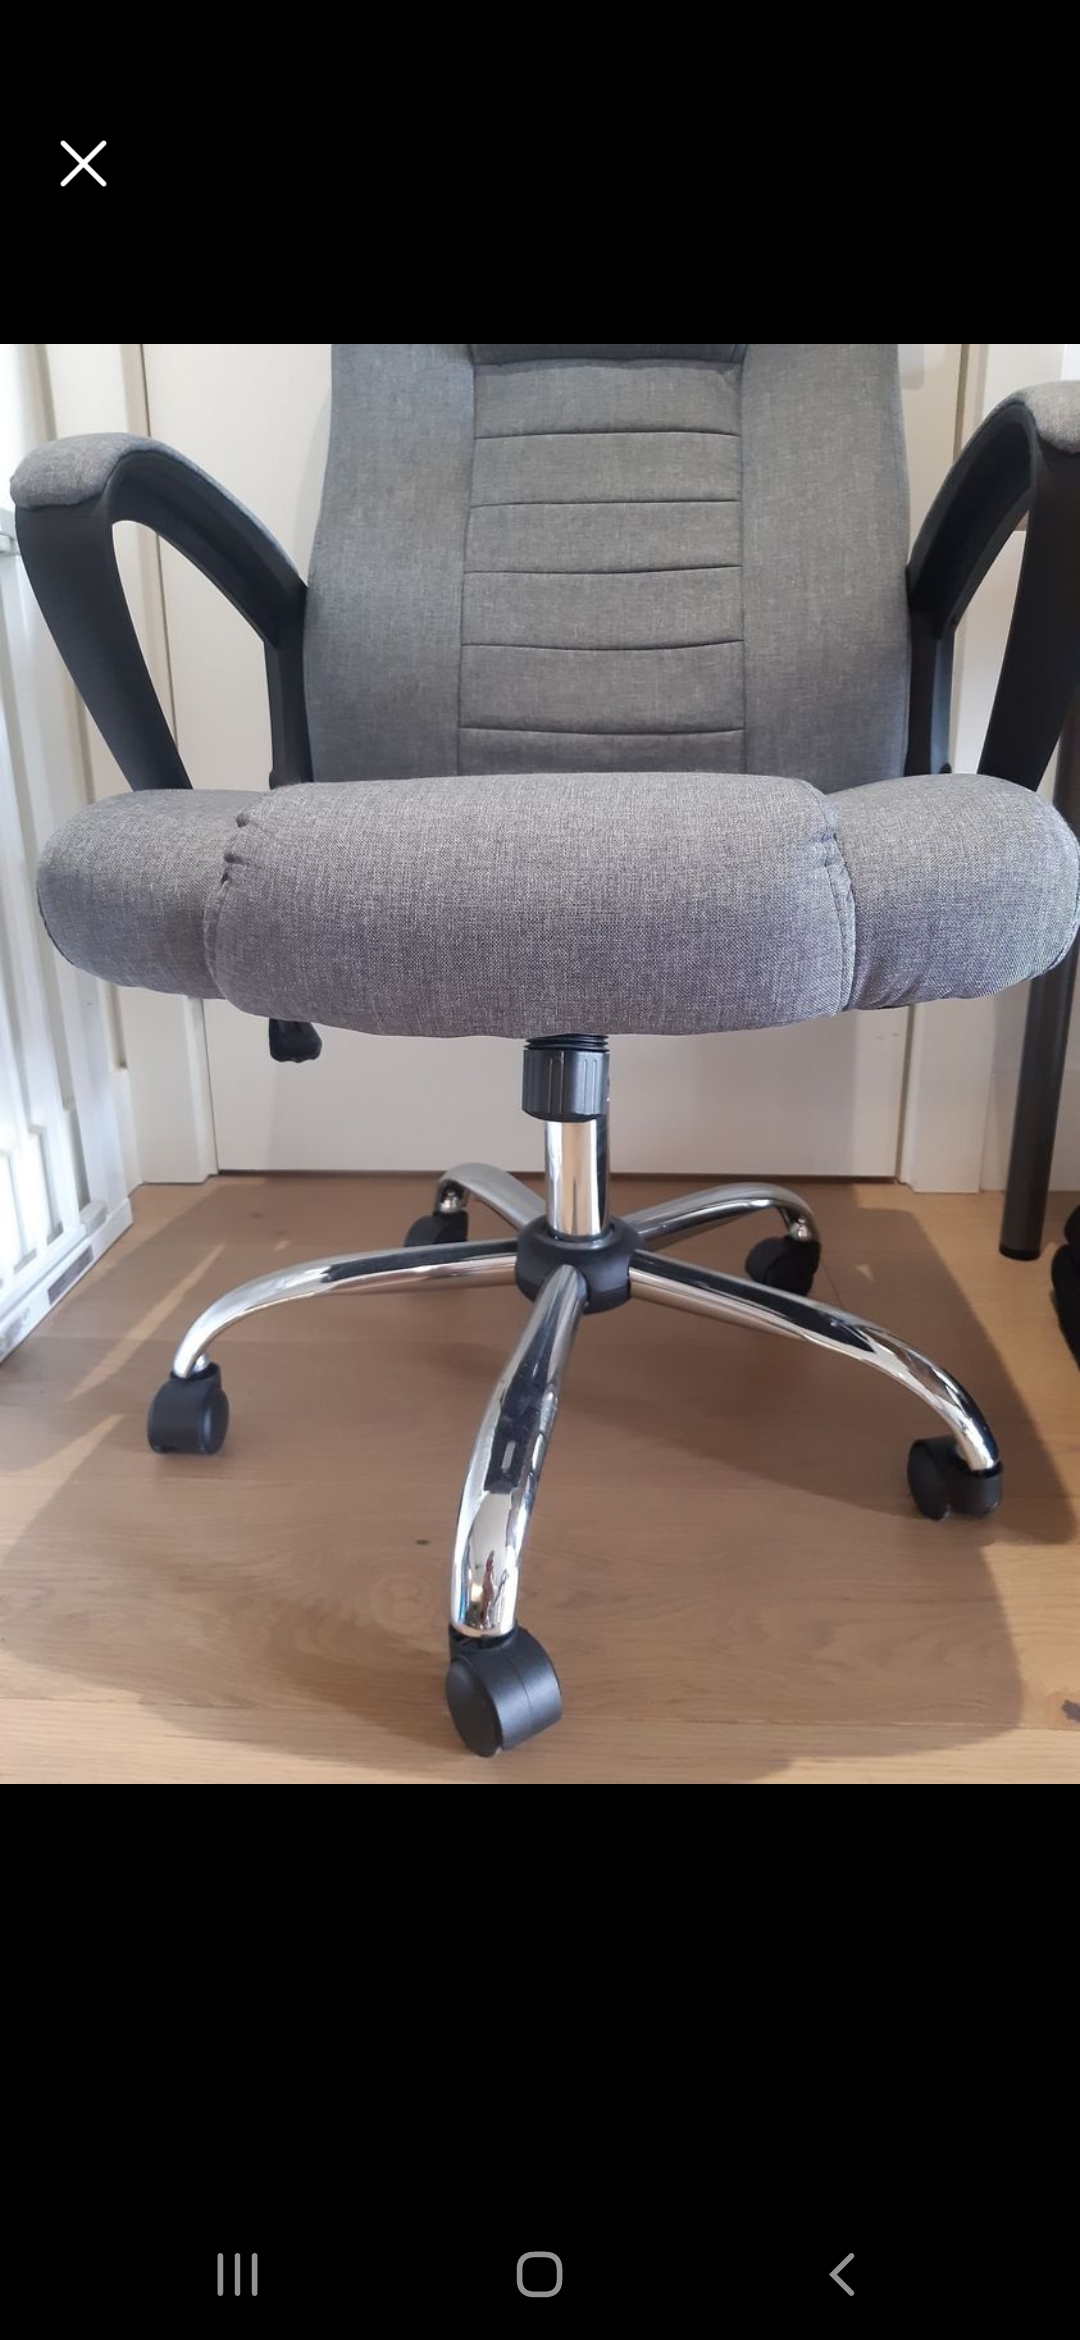 Picture shows gray ergonomic office chair.